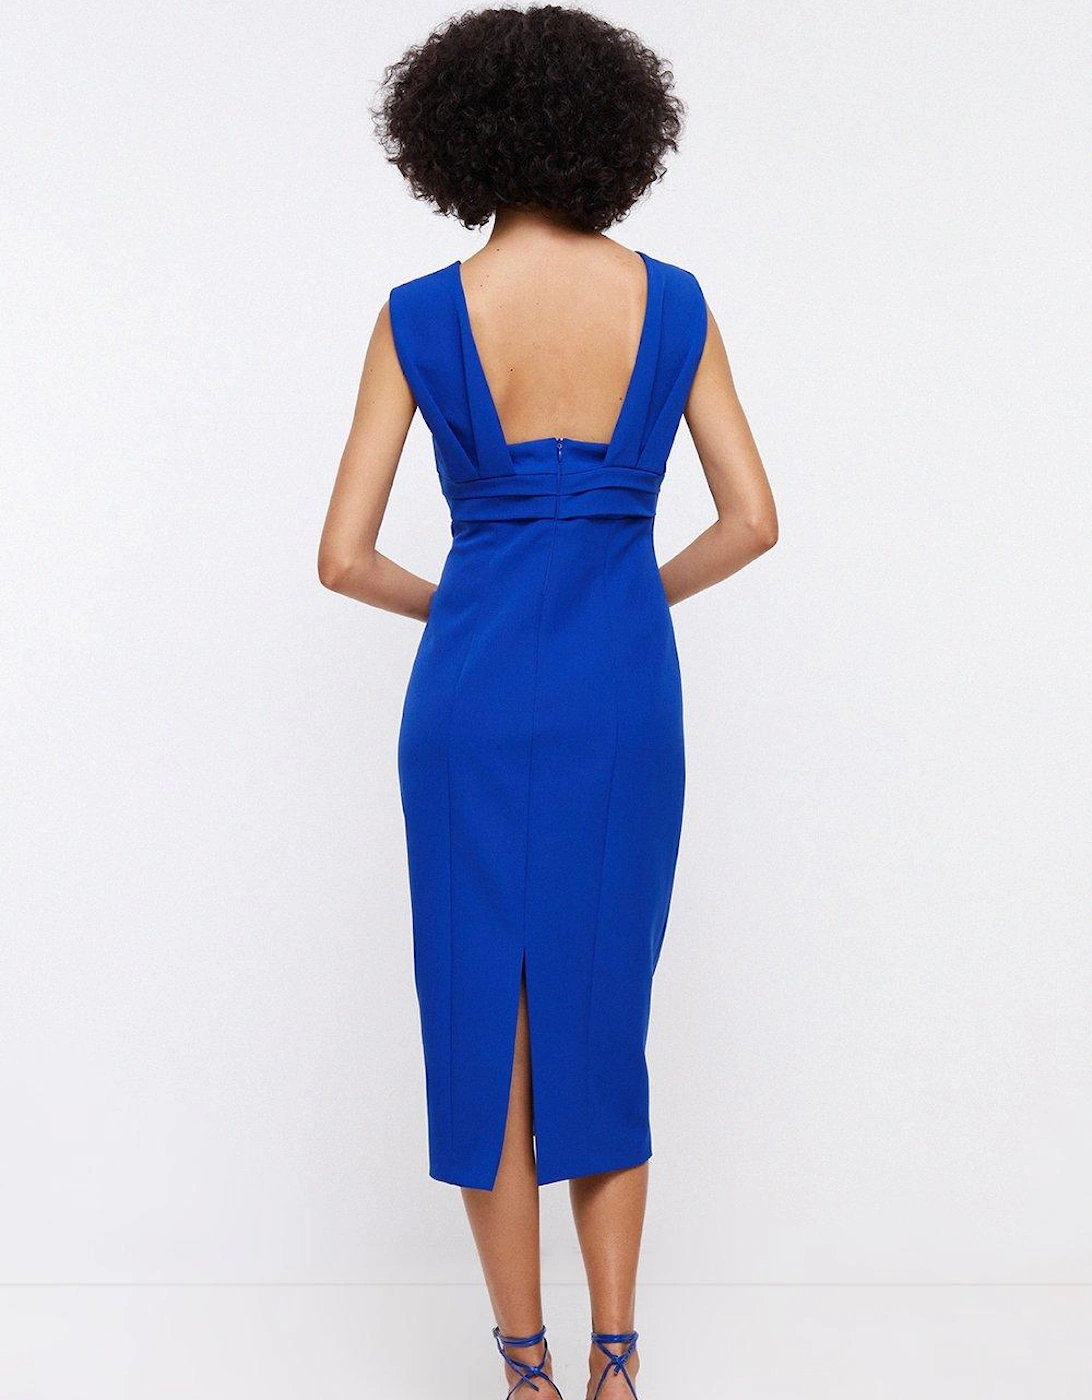 Pleated Strap And Waist Detail Pencil Dress